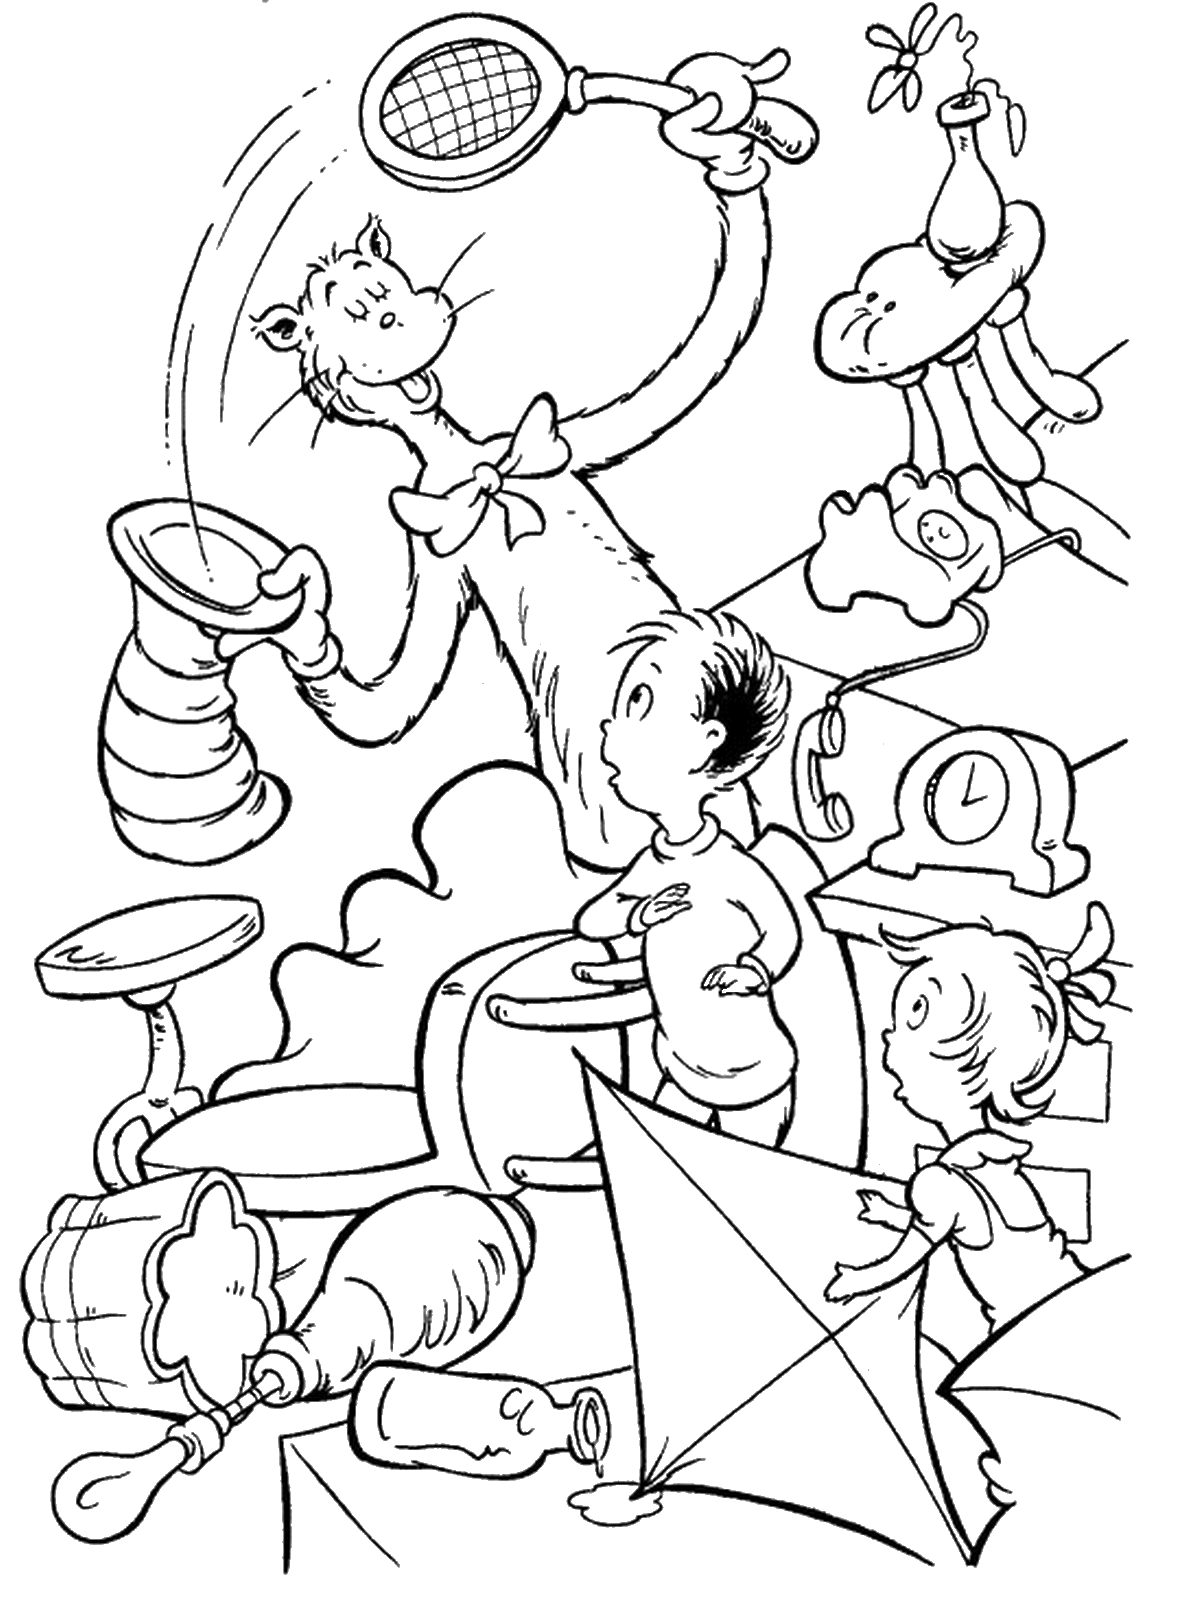 the cat in the hat coloring pages printable cat in the hat coloring pages pages in printable cat the hat the coloring 